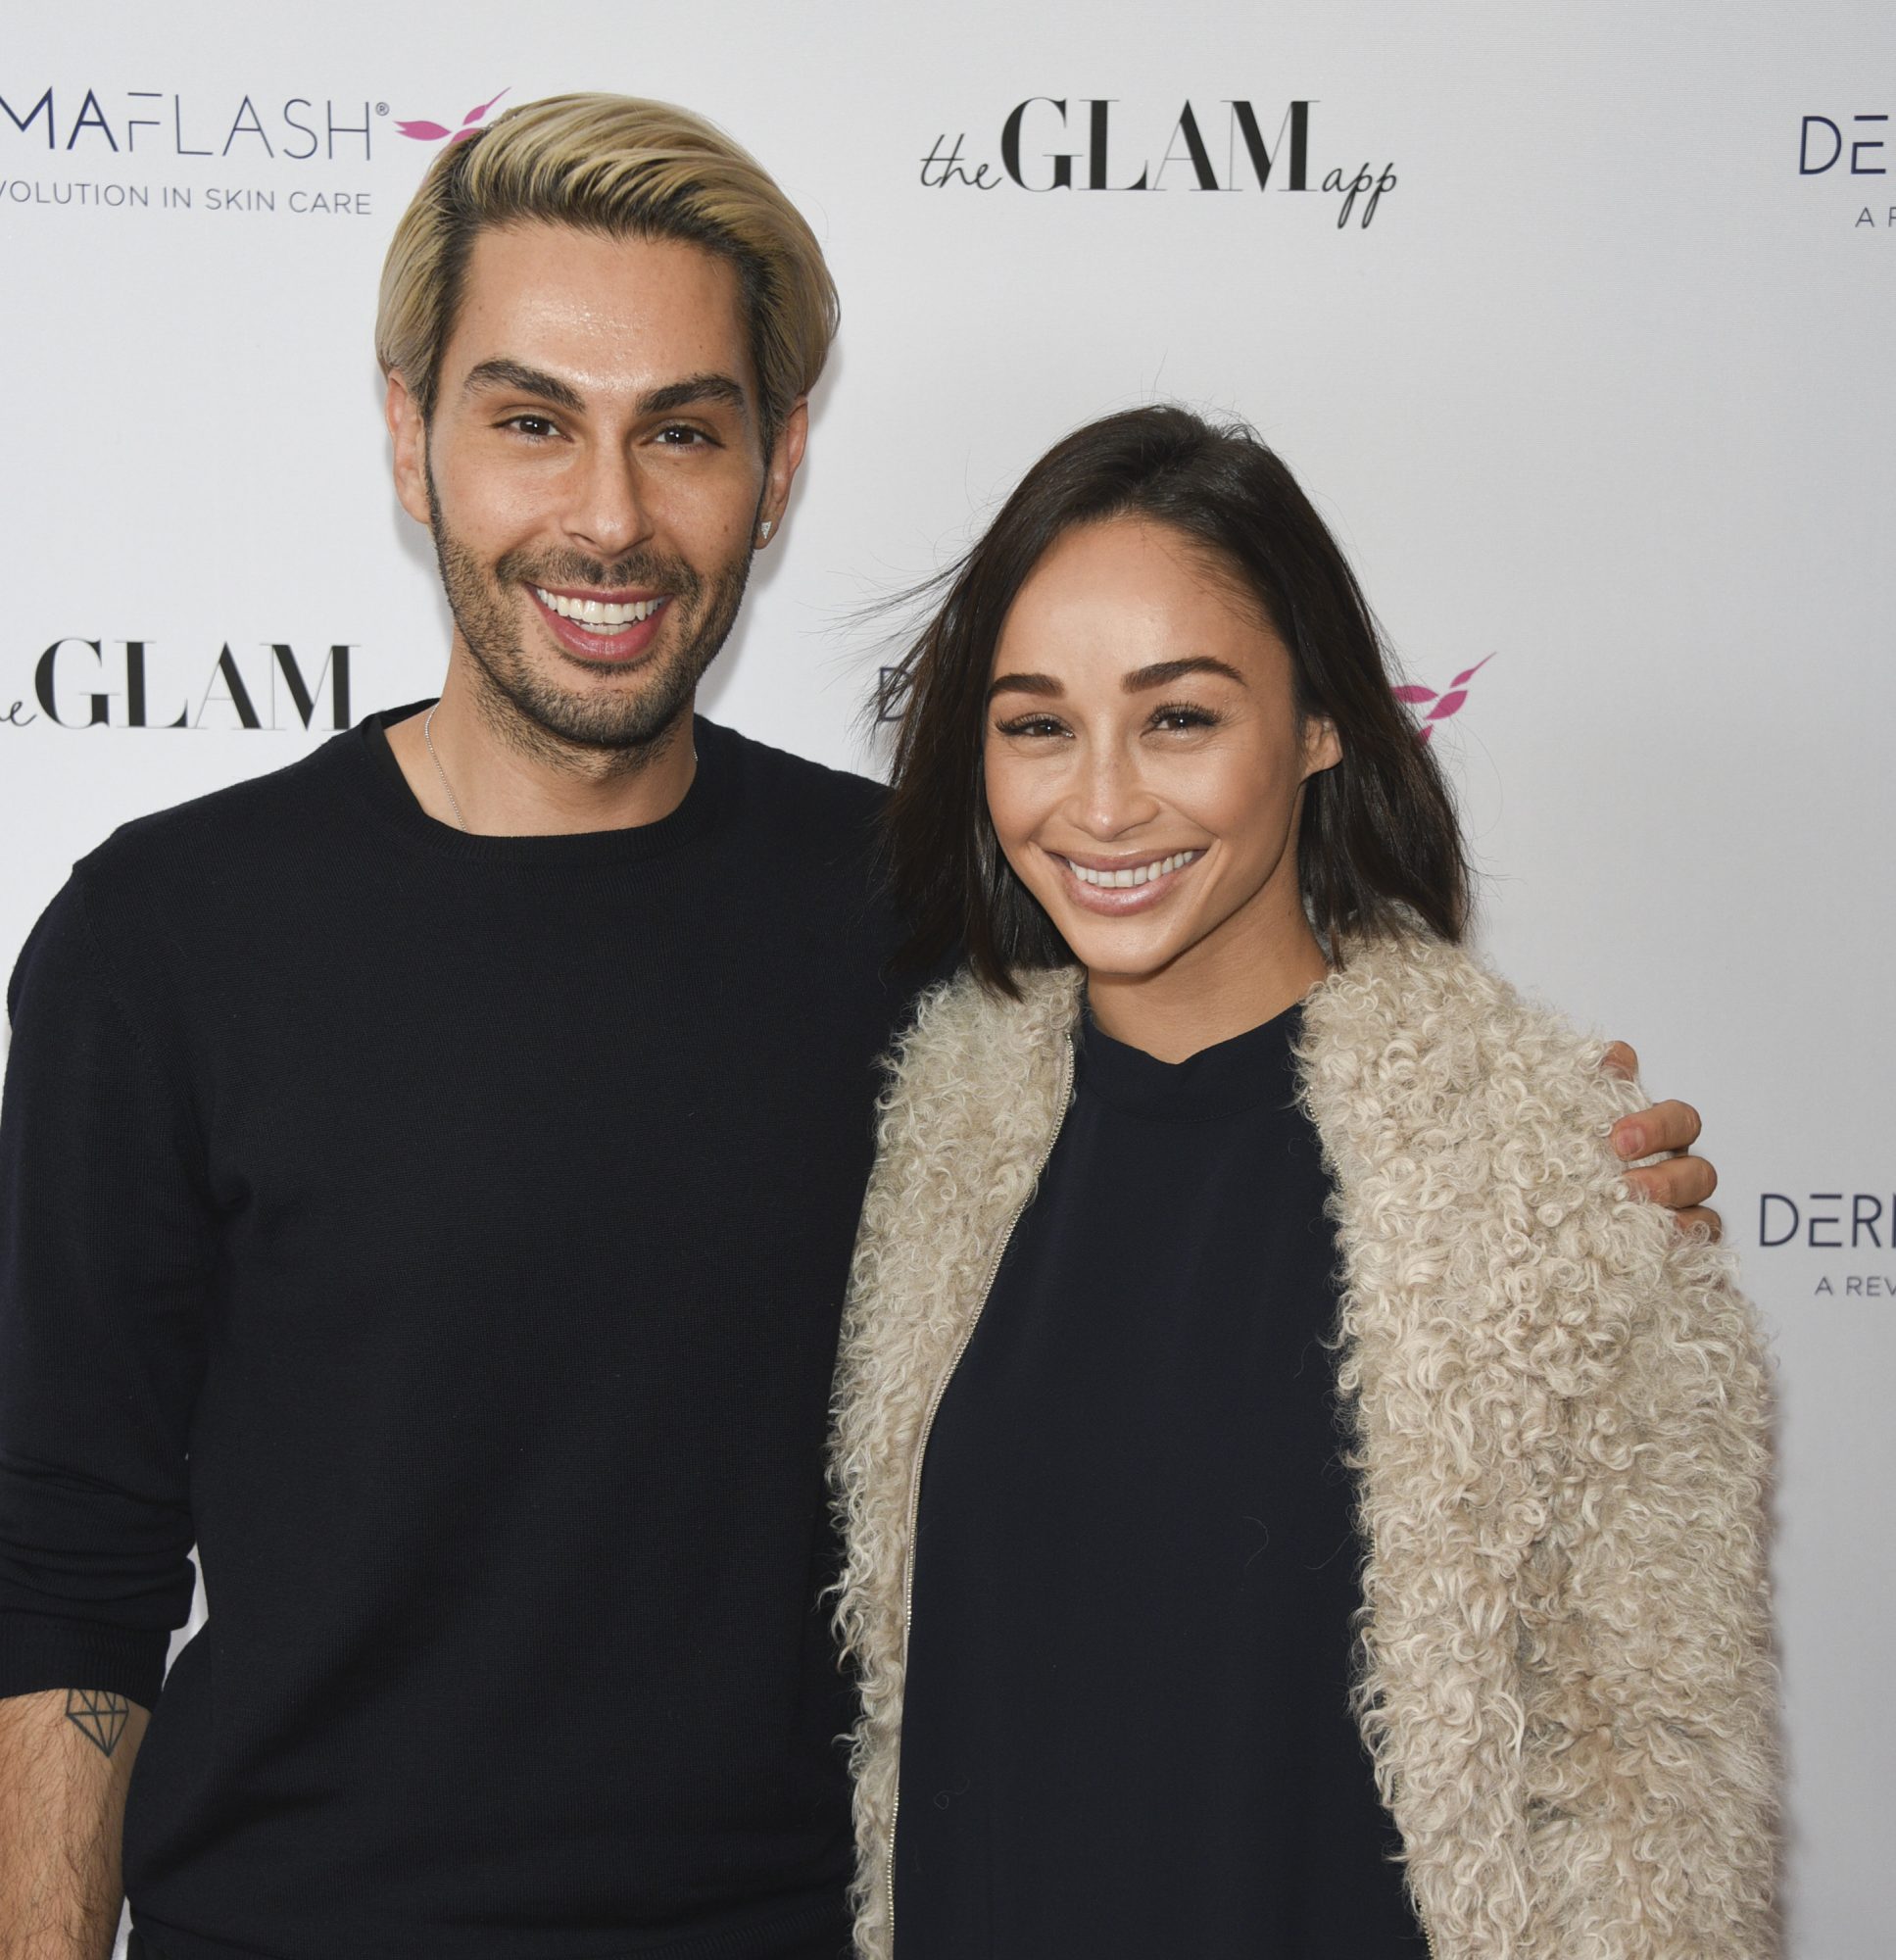 BEVERLY HILLS, CA - FEBRUARY 24:  Joey Maloof and Ashley Madekwe attends The Glam App x DERMAFLASH Host Pre-Oscars Suite at Peninsula Hotel on February 24, 2017 in Beverly Hills, California.  (Photo by Michael Bezjian/WireImage)